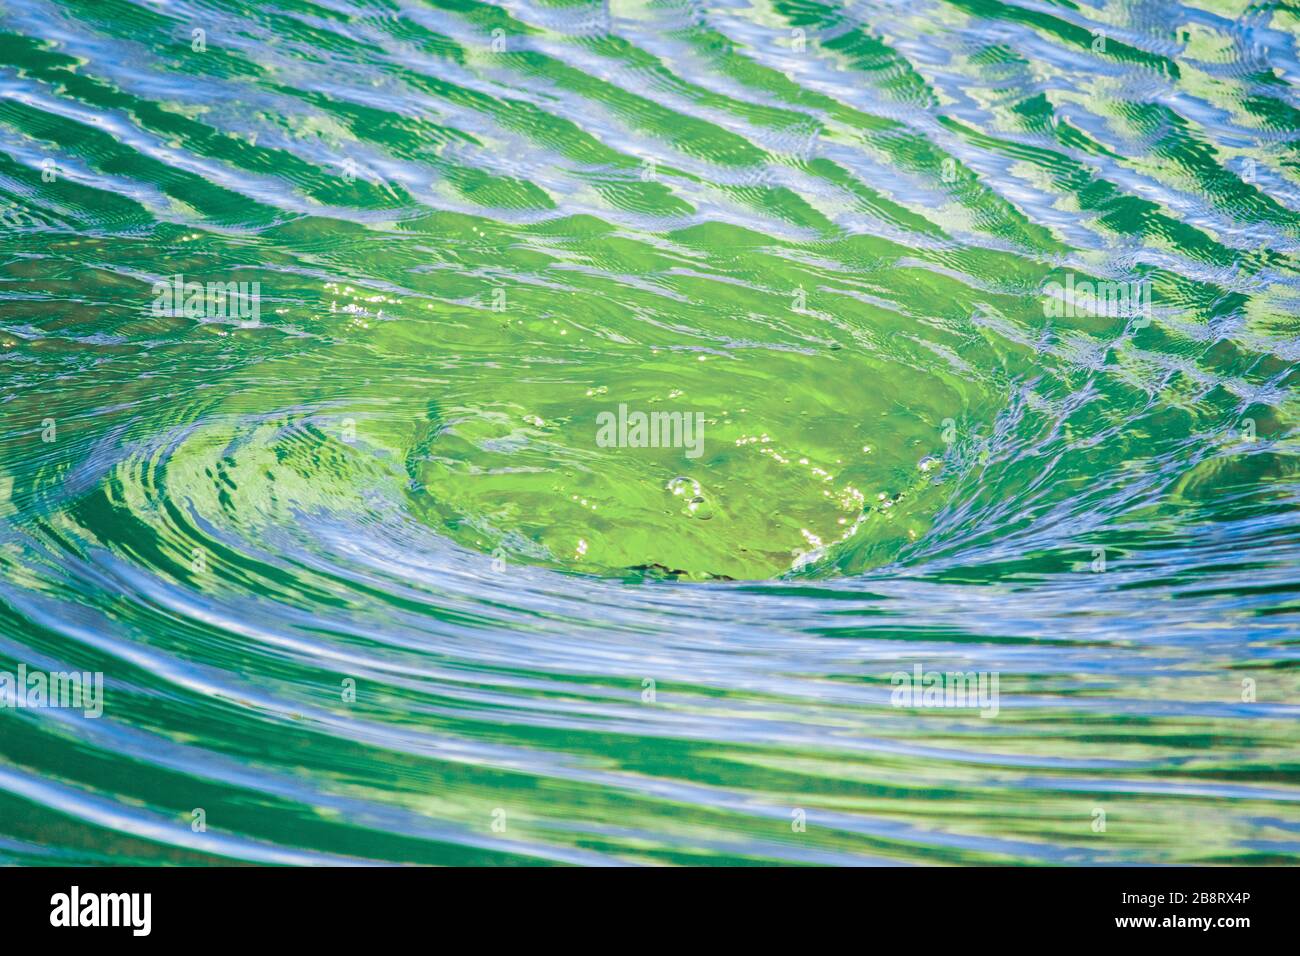 Vortex Of Water Going Down Plughole Underwater View High-Res Stock Photo -  Getty Images